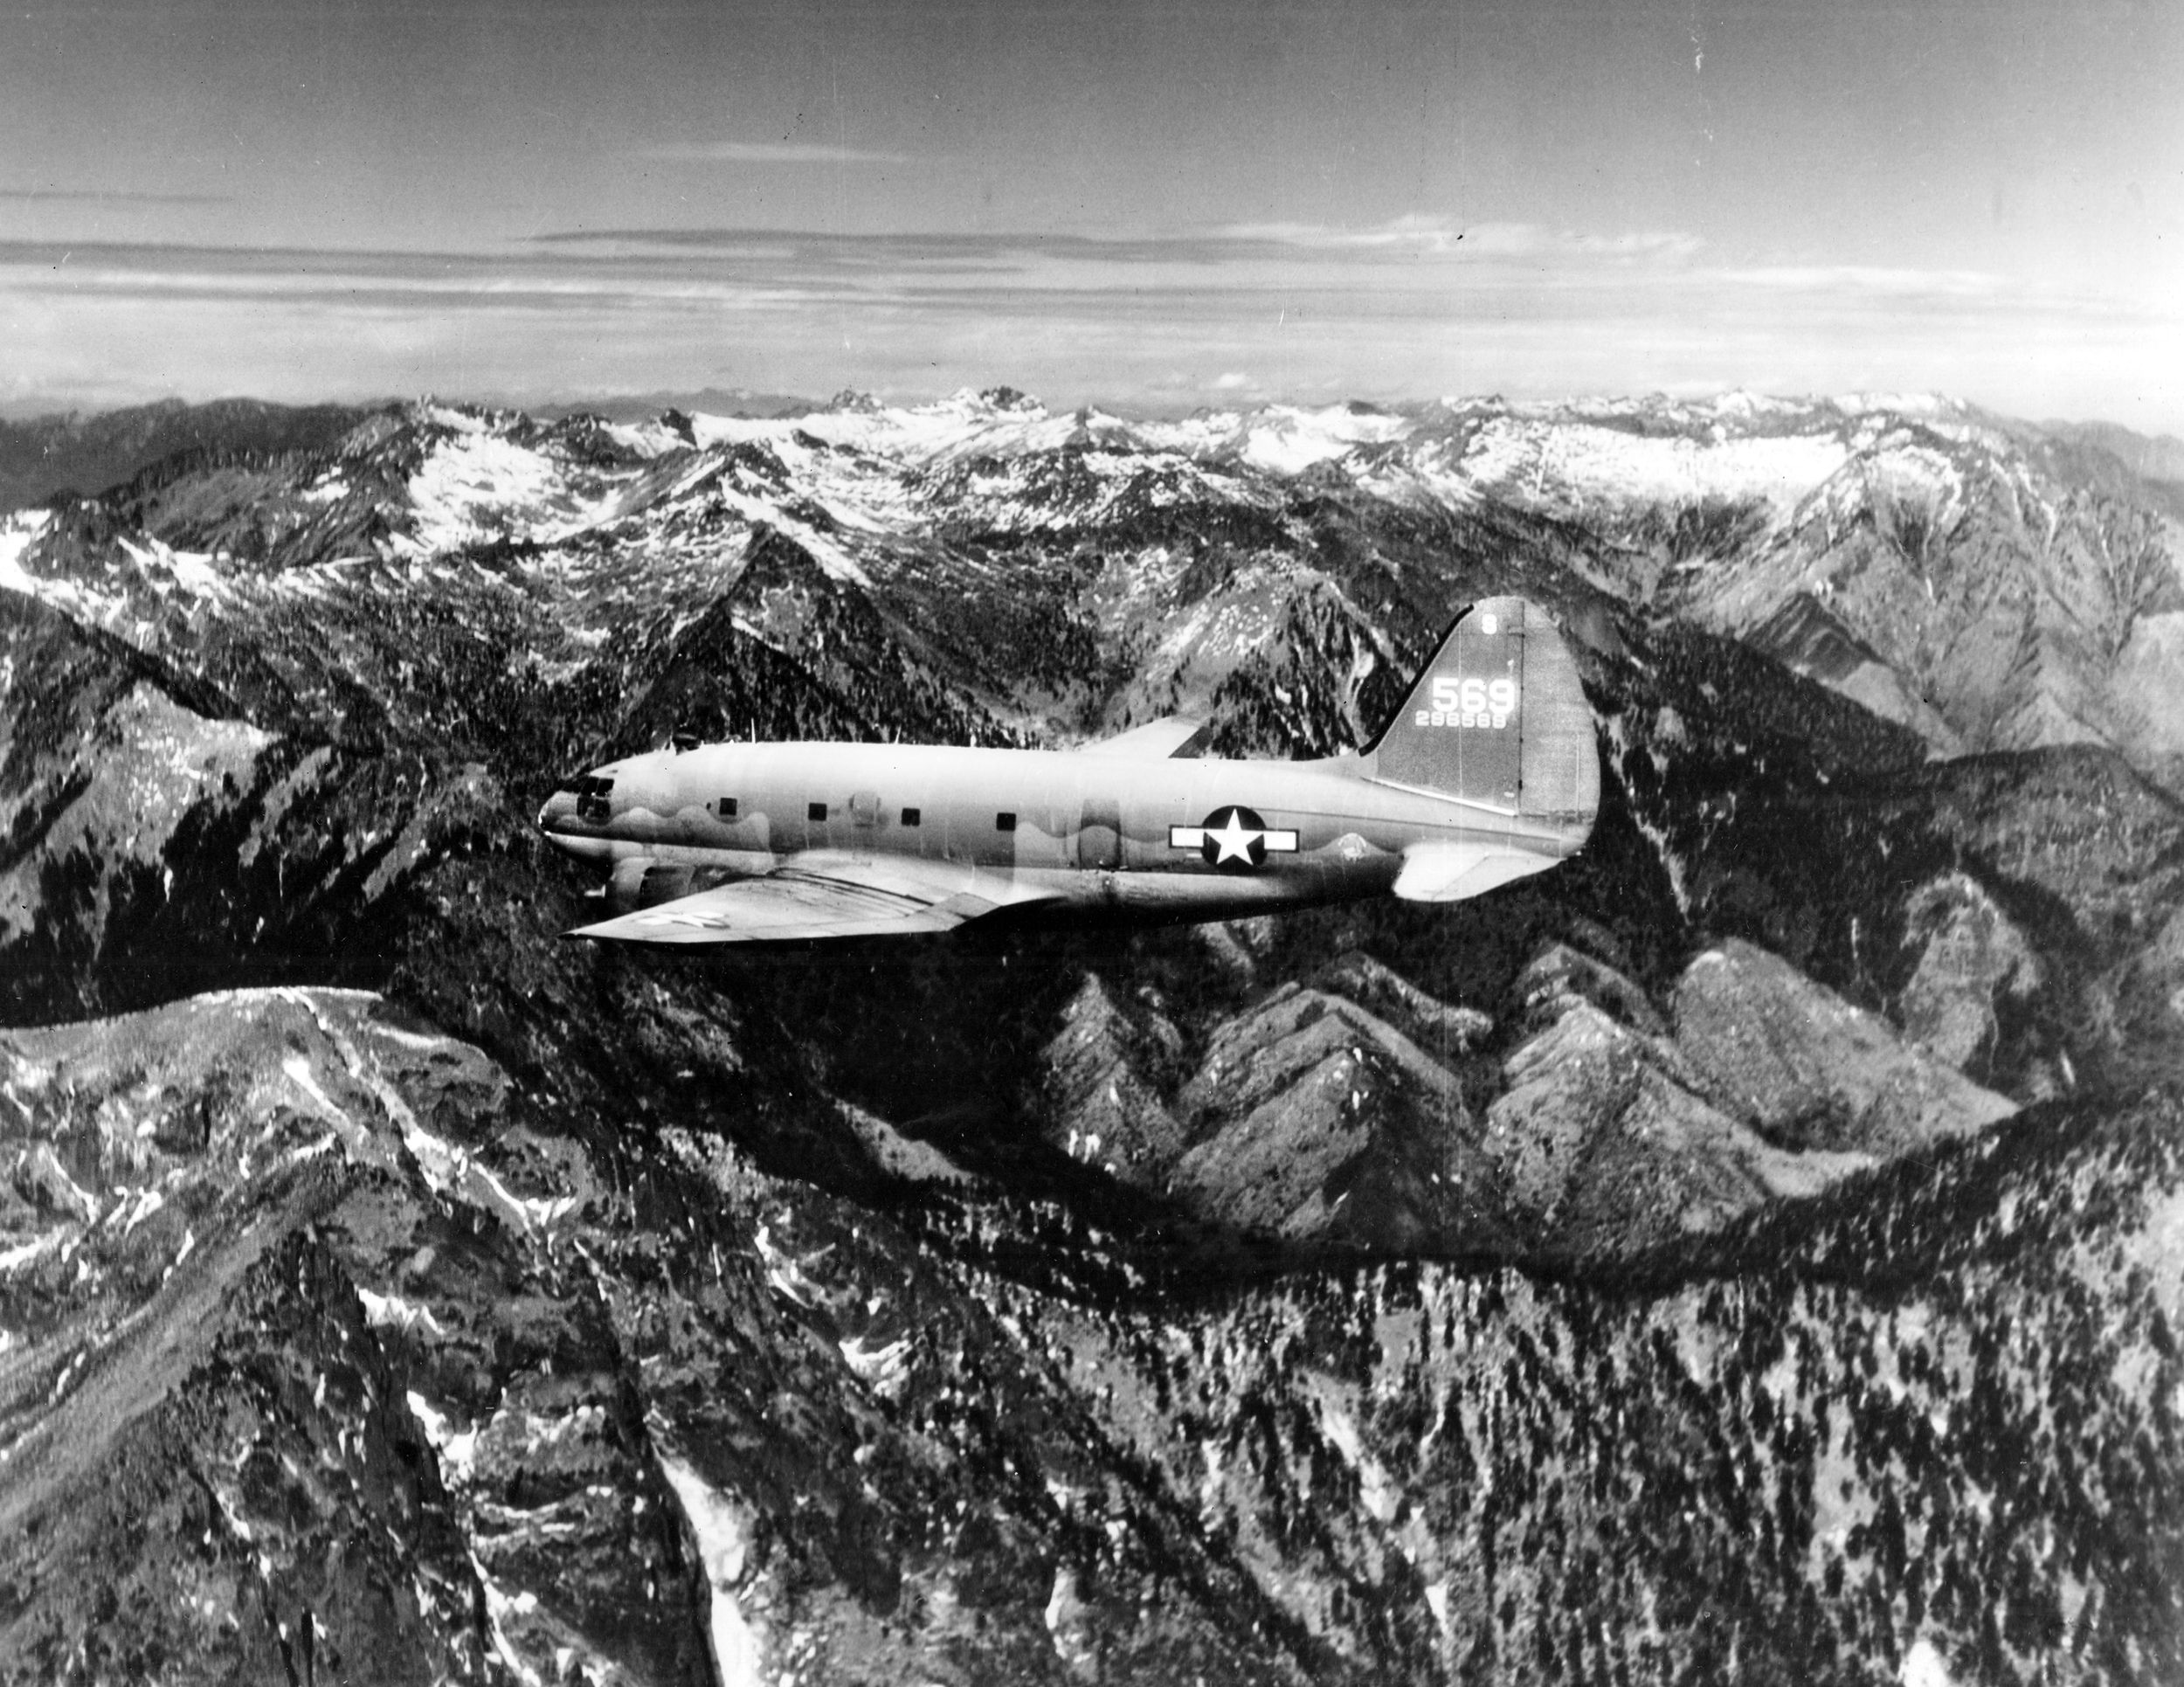 Curtiss C-46 Commando in the snow-capped Himalayas between India and China. Every two and a half minutes, the India-China Division of ATC puts a plane across this route.